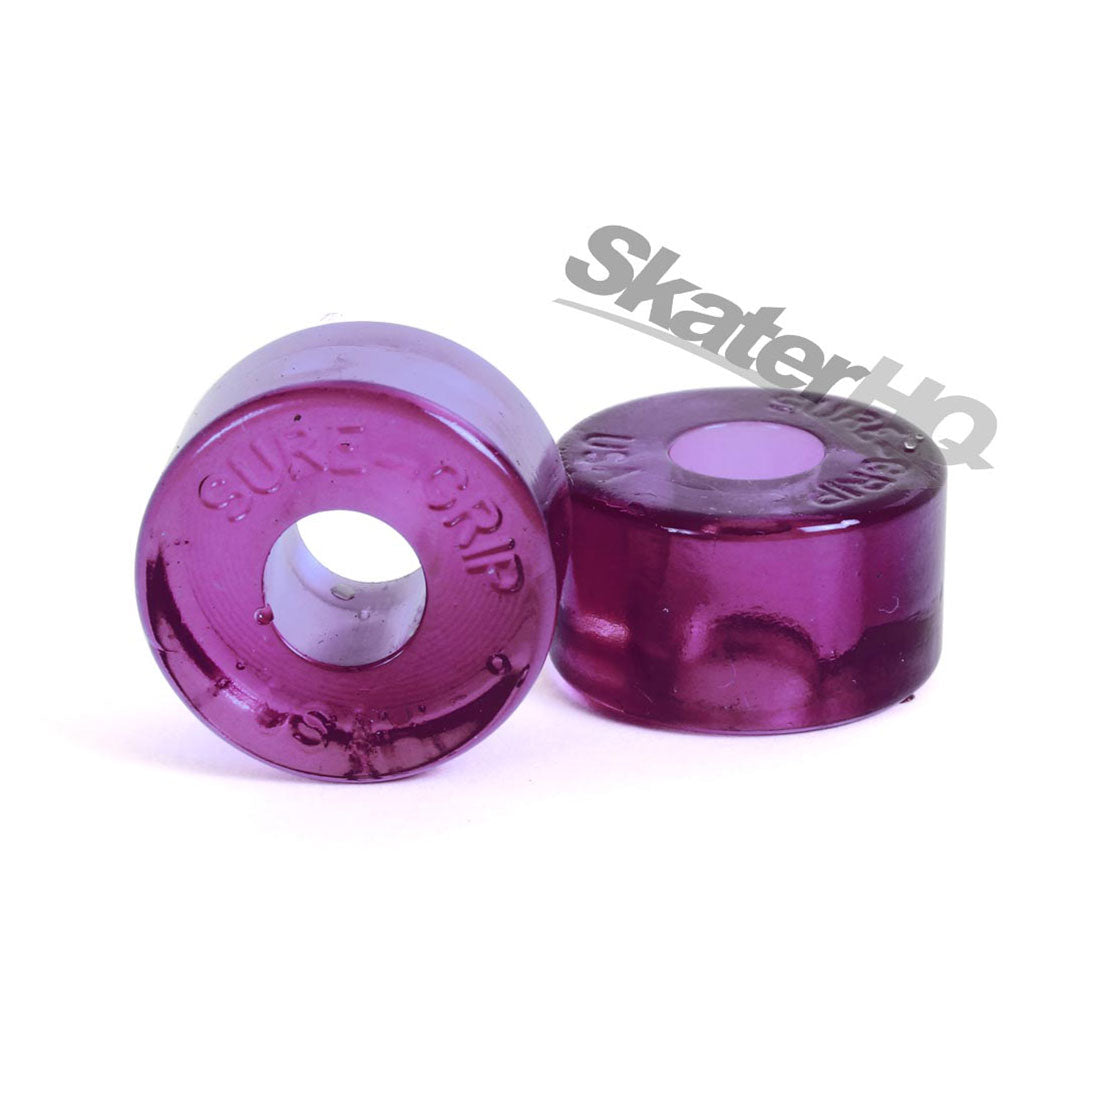 Sure-Grip Barrel Cushions 85a 4pk - Purple Roller Skate Hardware and Parts